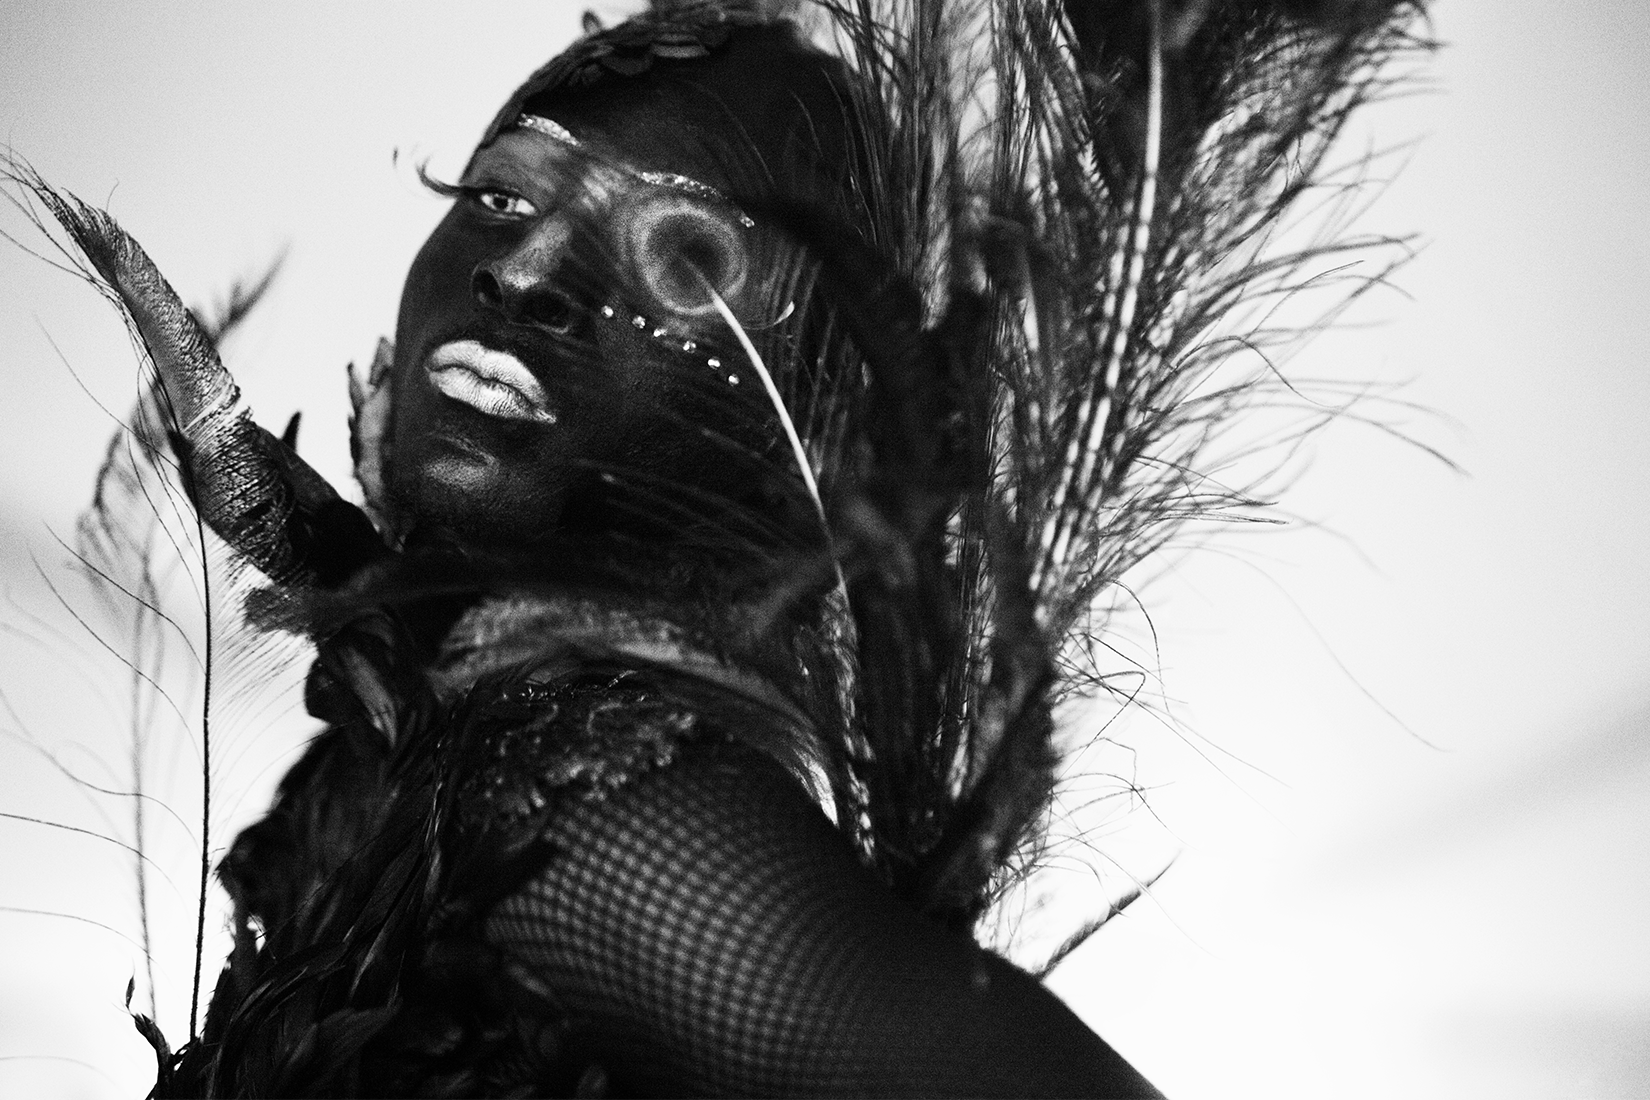 Black and white photo portrait of an artist dressed in feathers in voguing style.